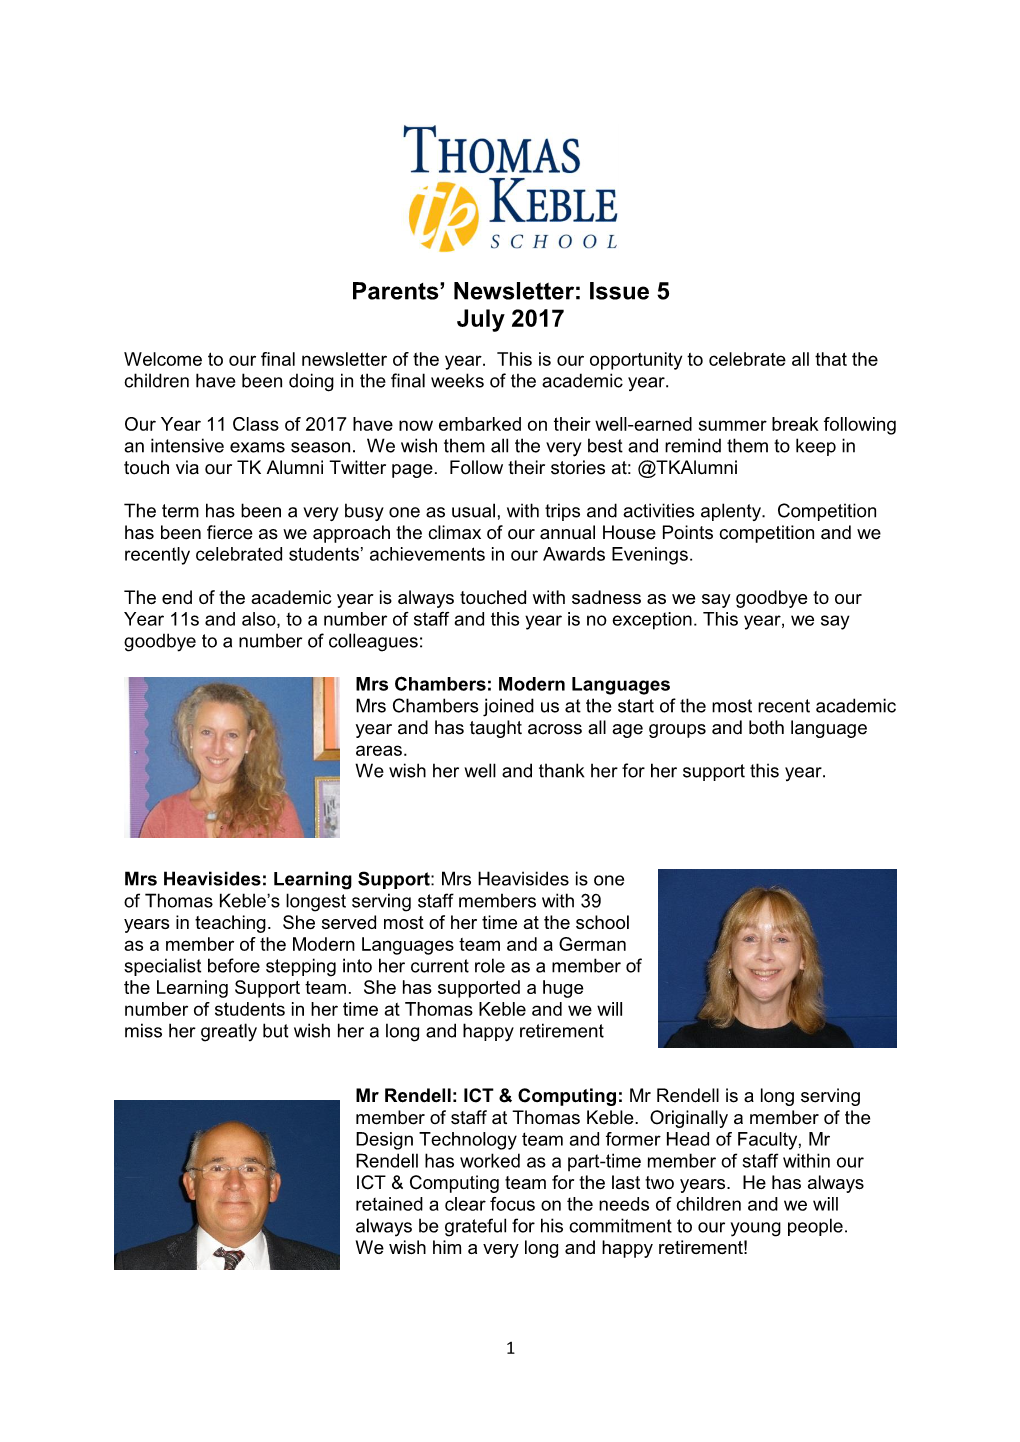 Parents' Newsletter: Issue 5 July 2017